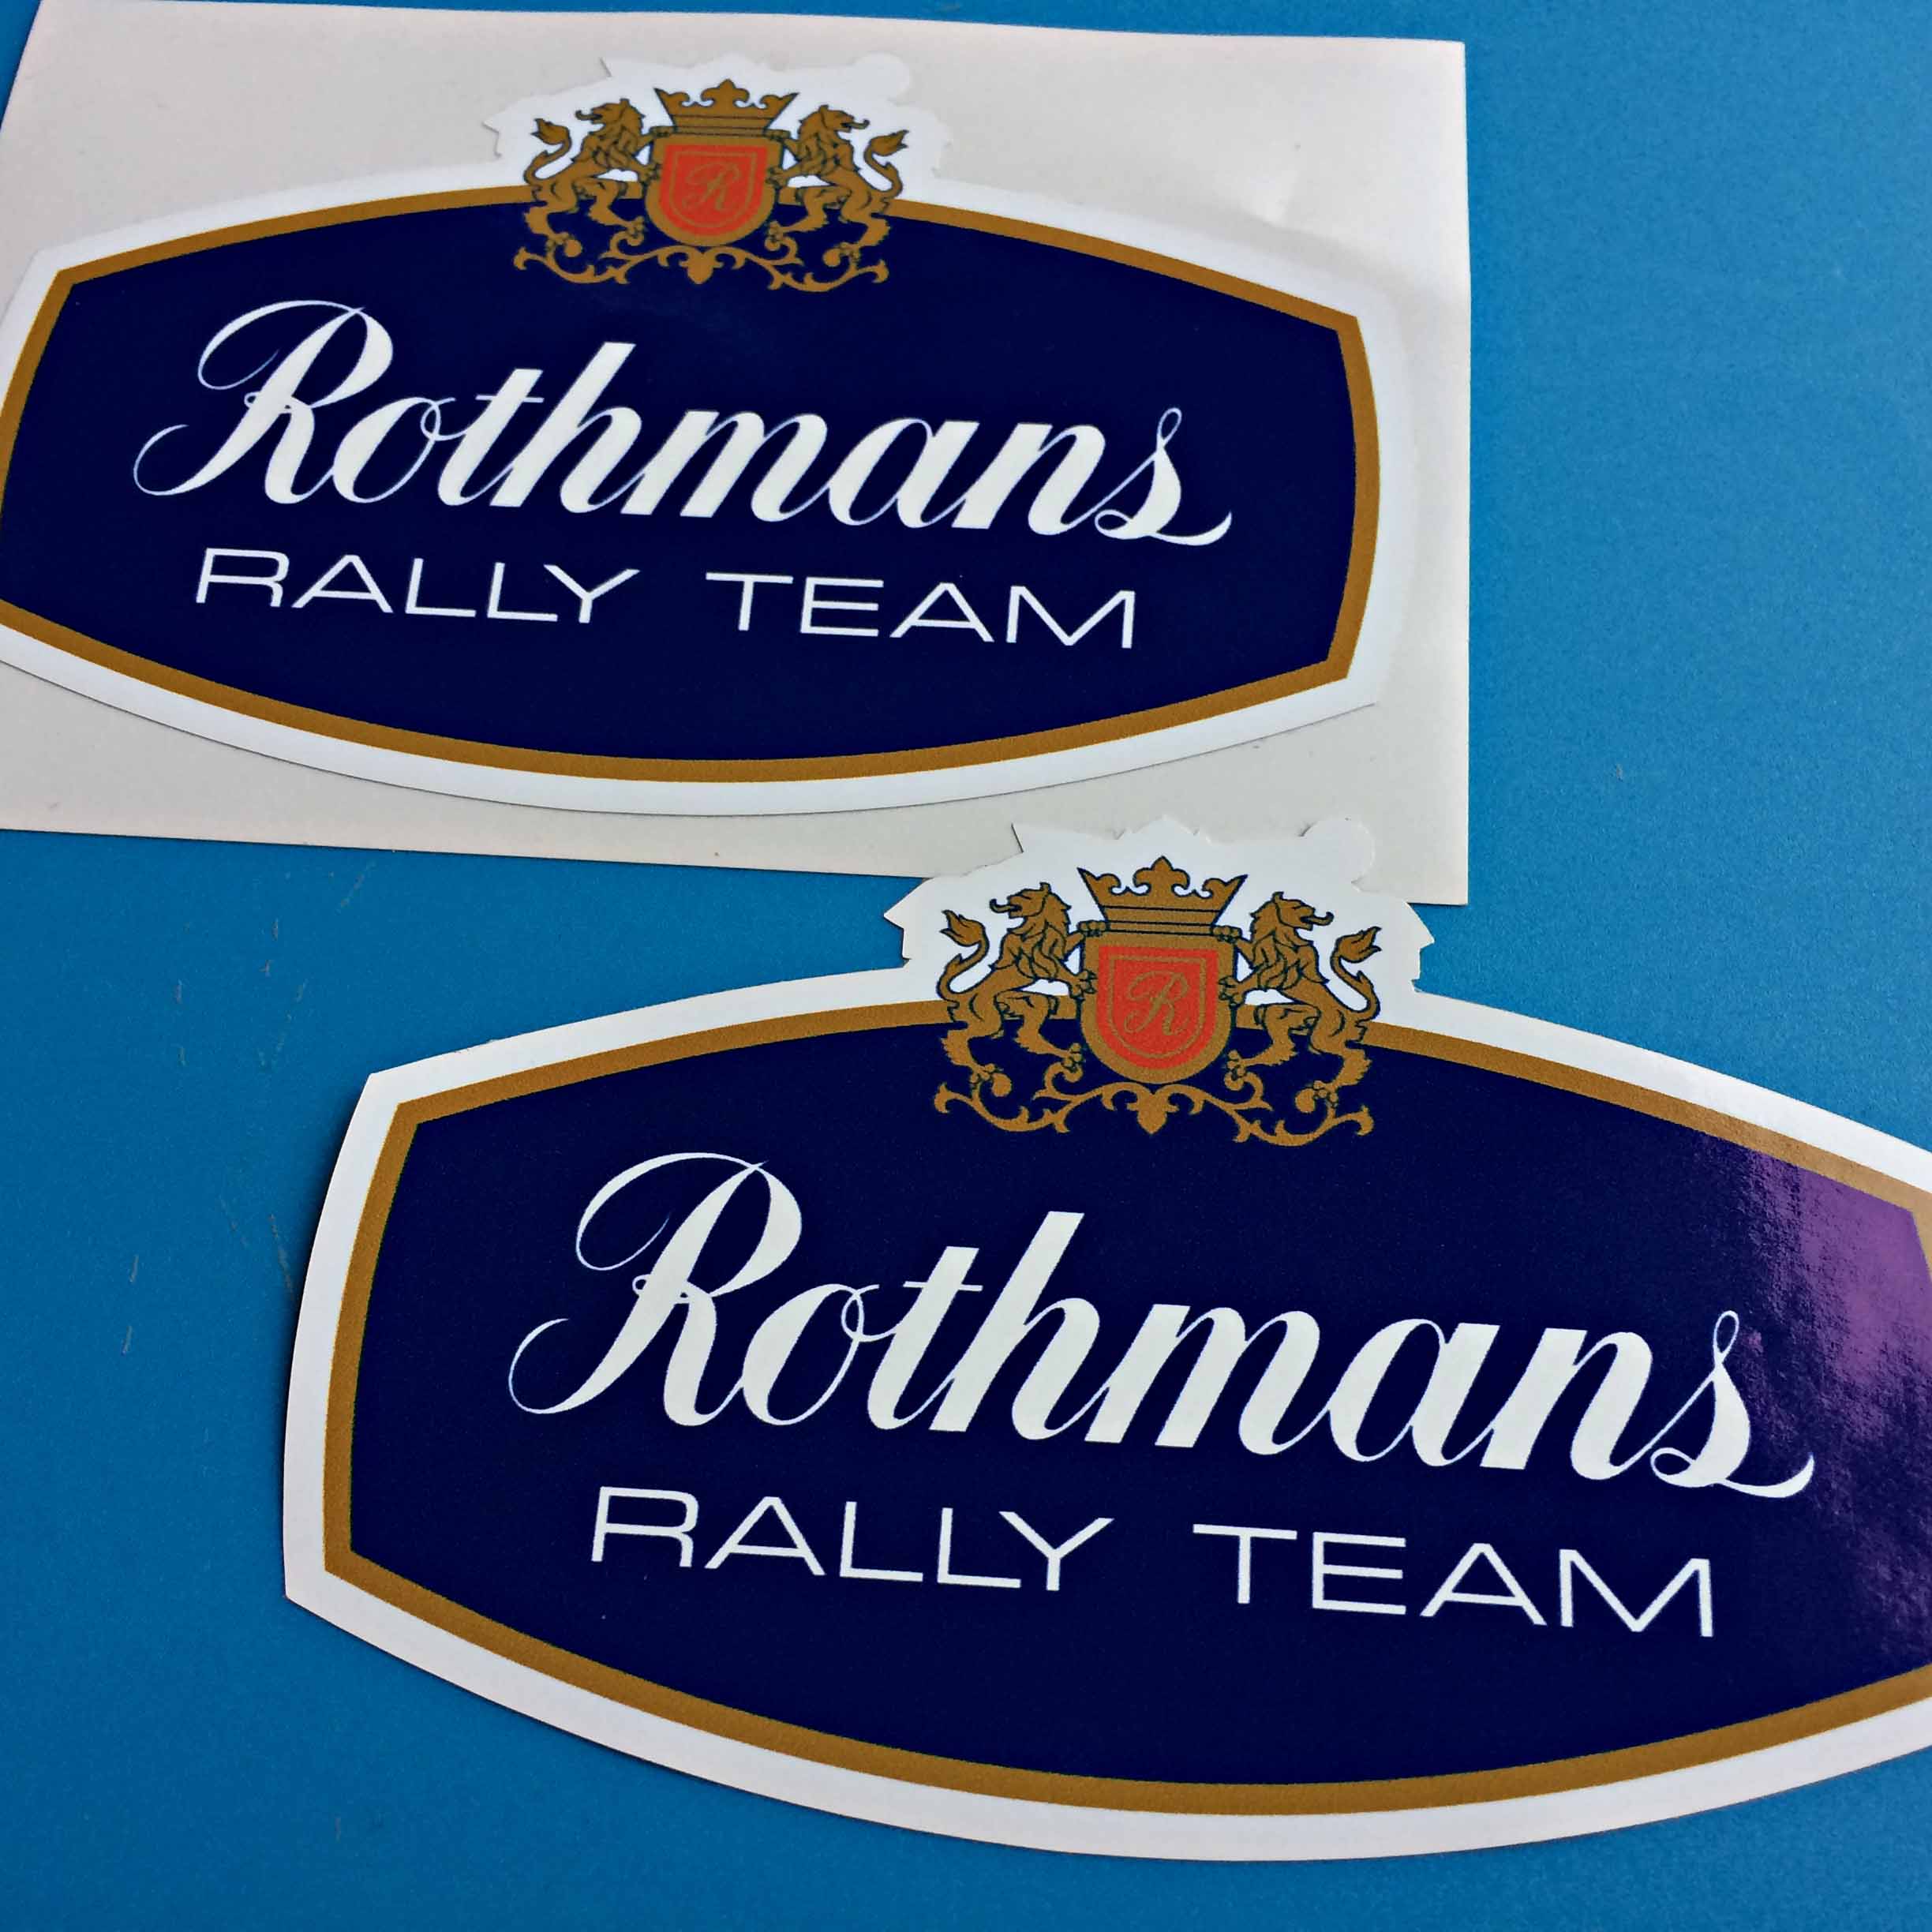 Rothmans Rally Team in white lettering on a blue background. Two golden lions are either side of a gold crown and shield. The shield has a gold R on a red background.